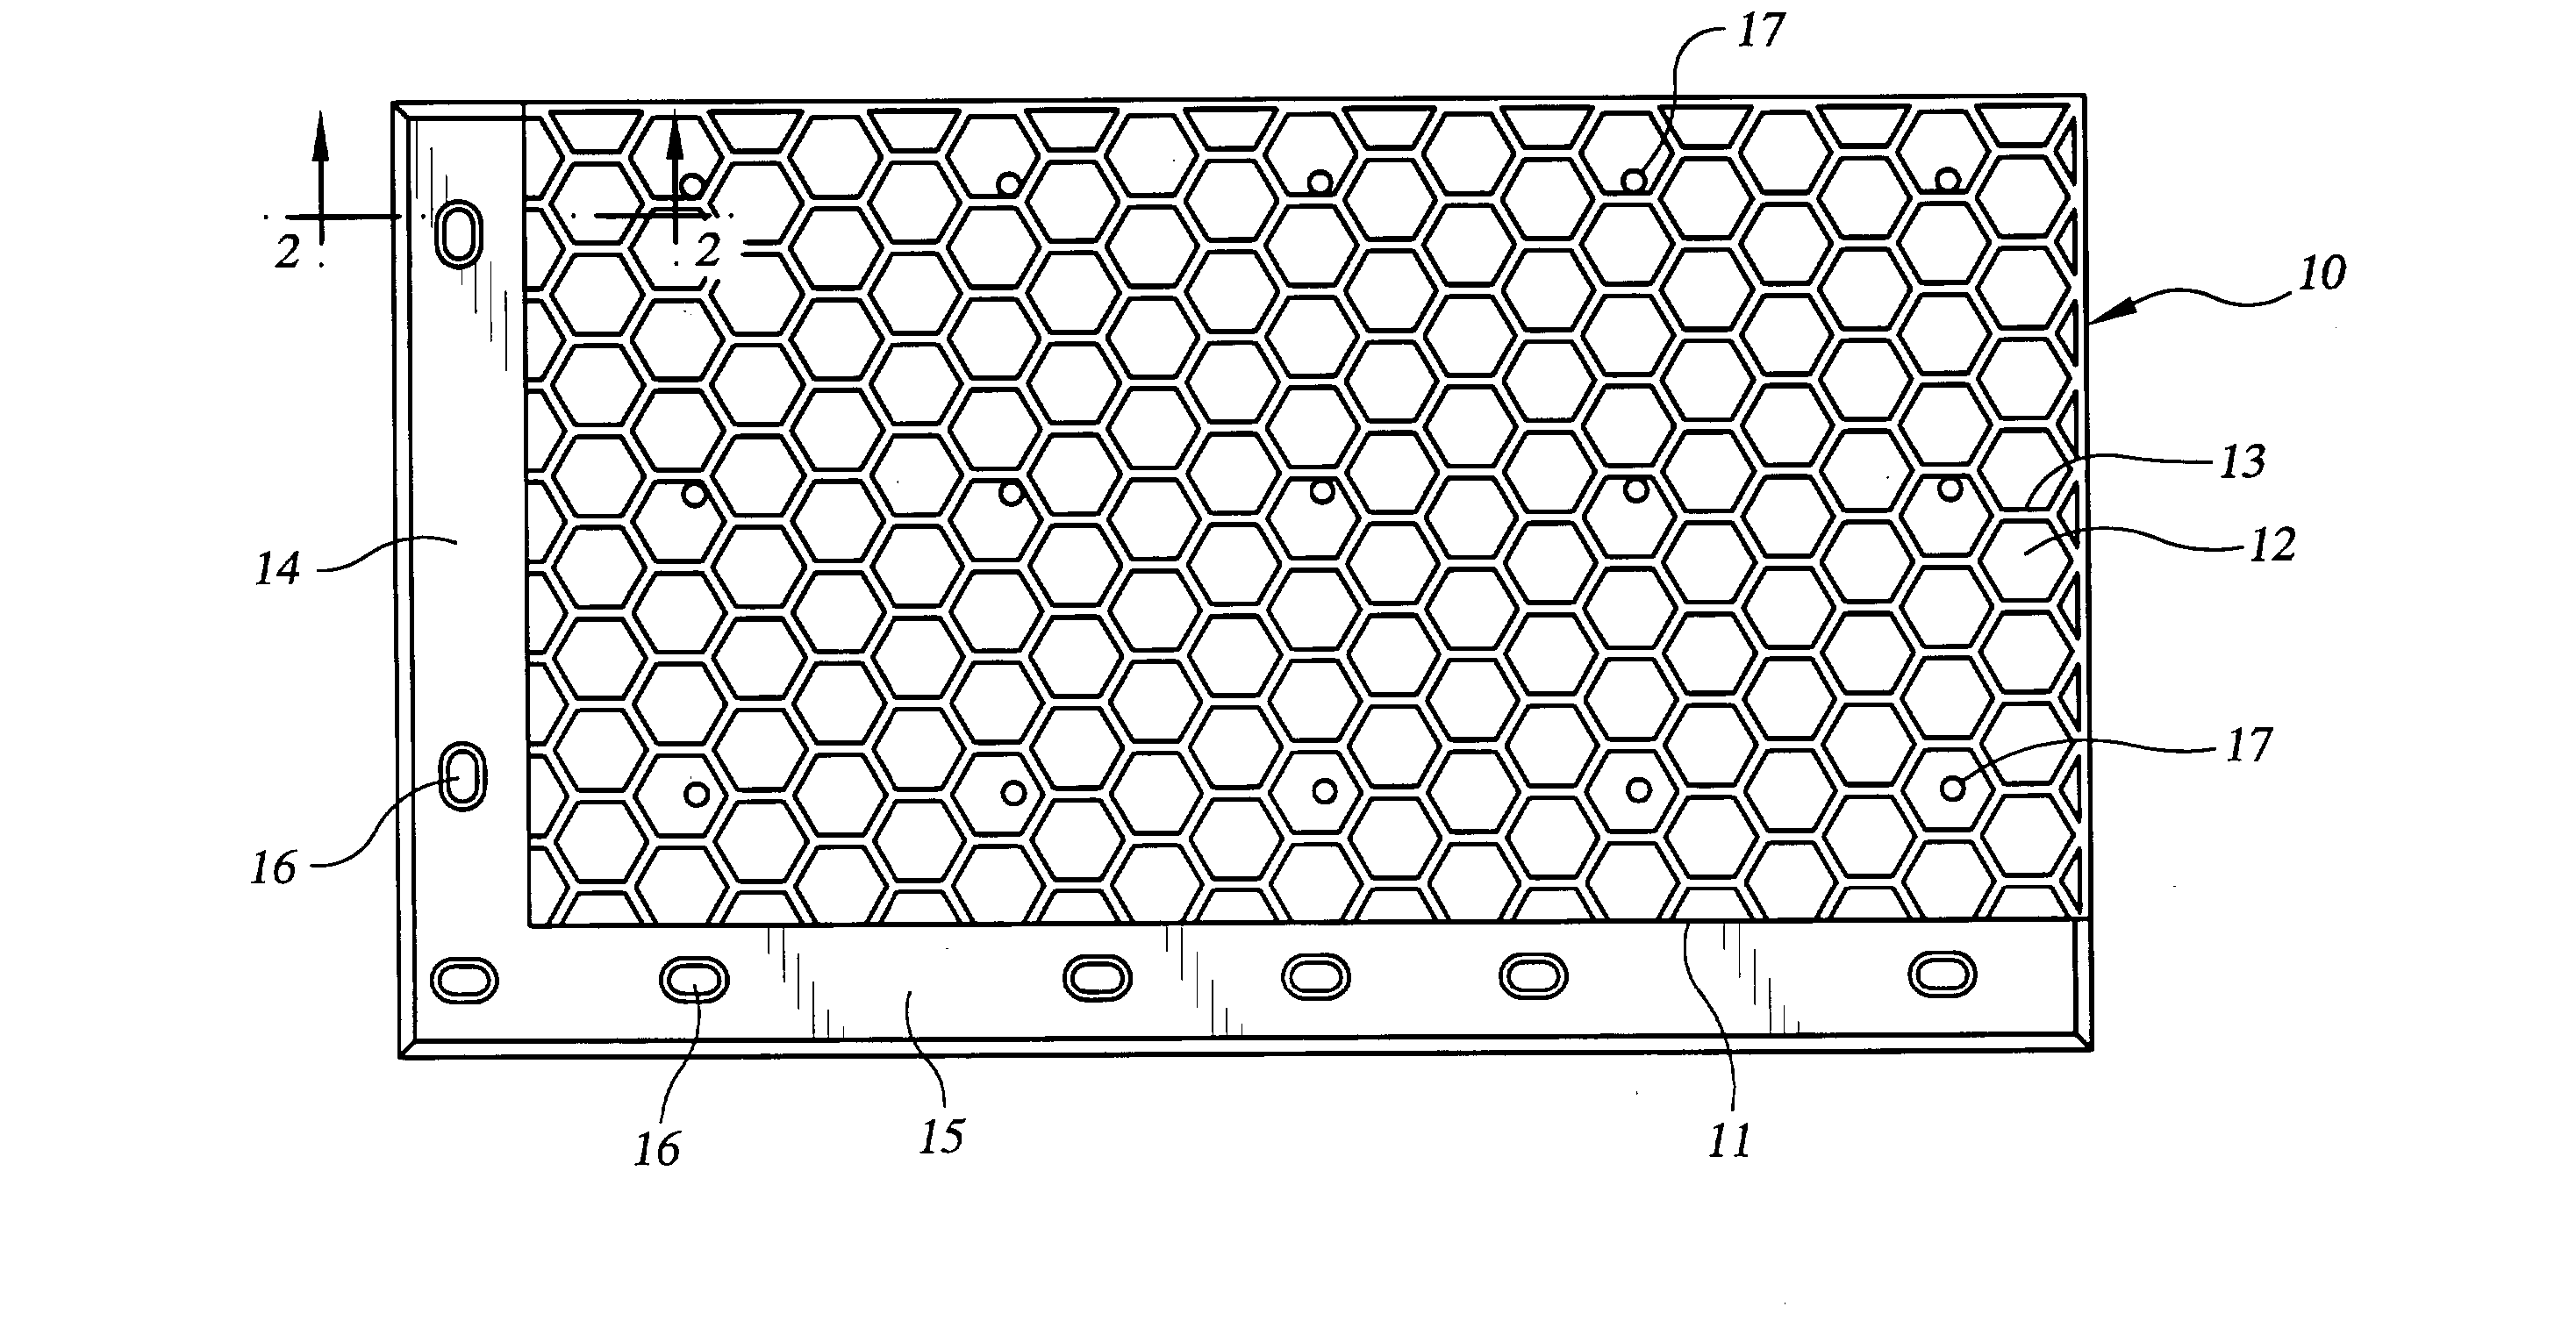 Interlocking mat system for construction of load supporting surfaces